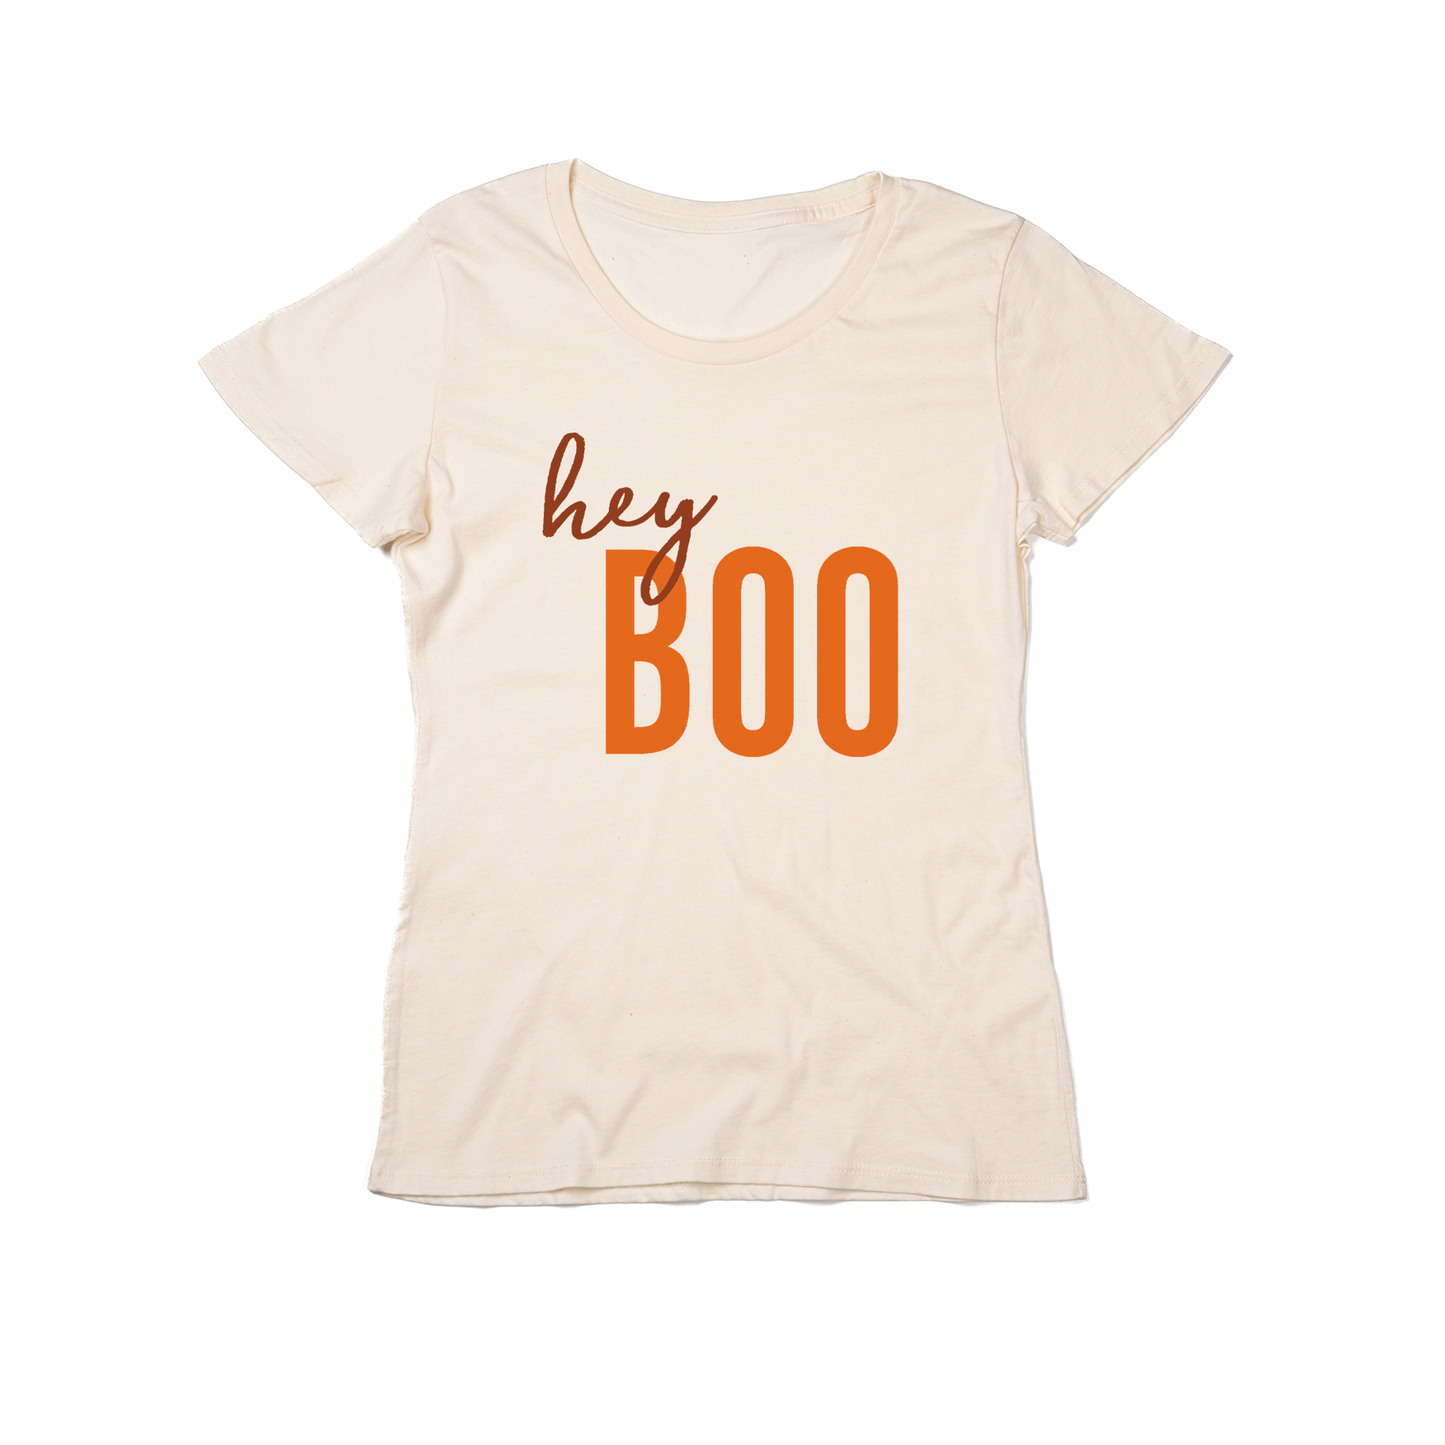 Hey Boo - Women's Fitted Tee (Natural)